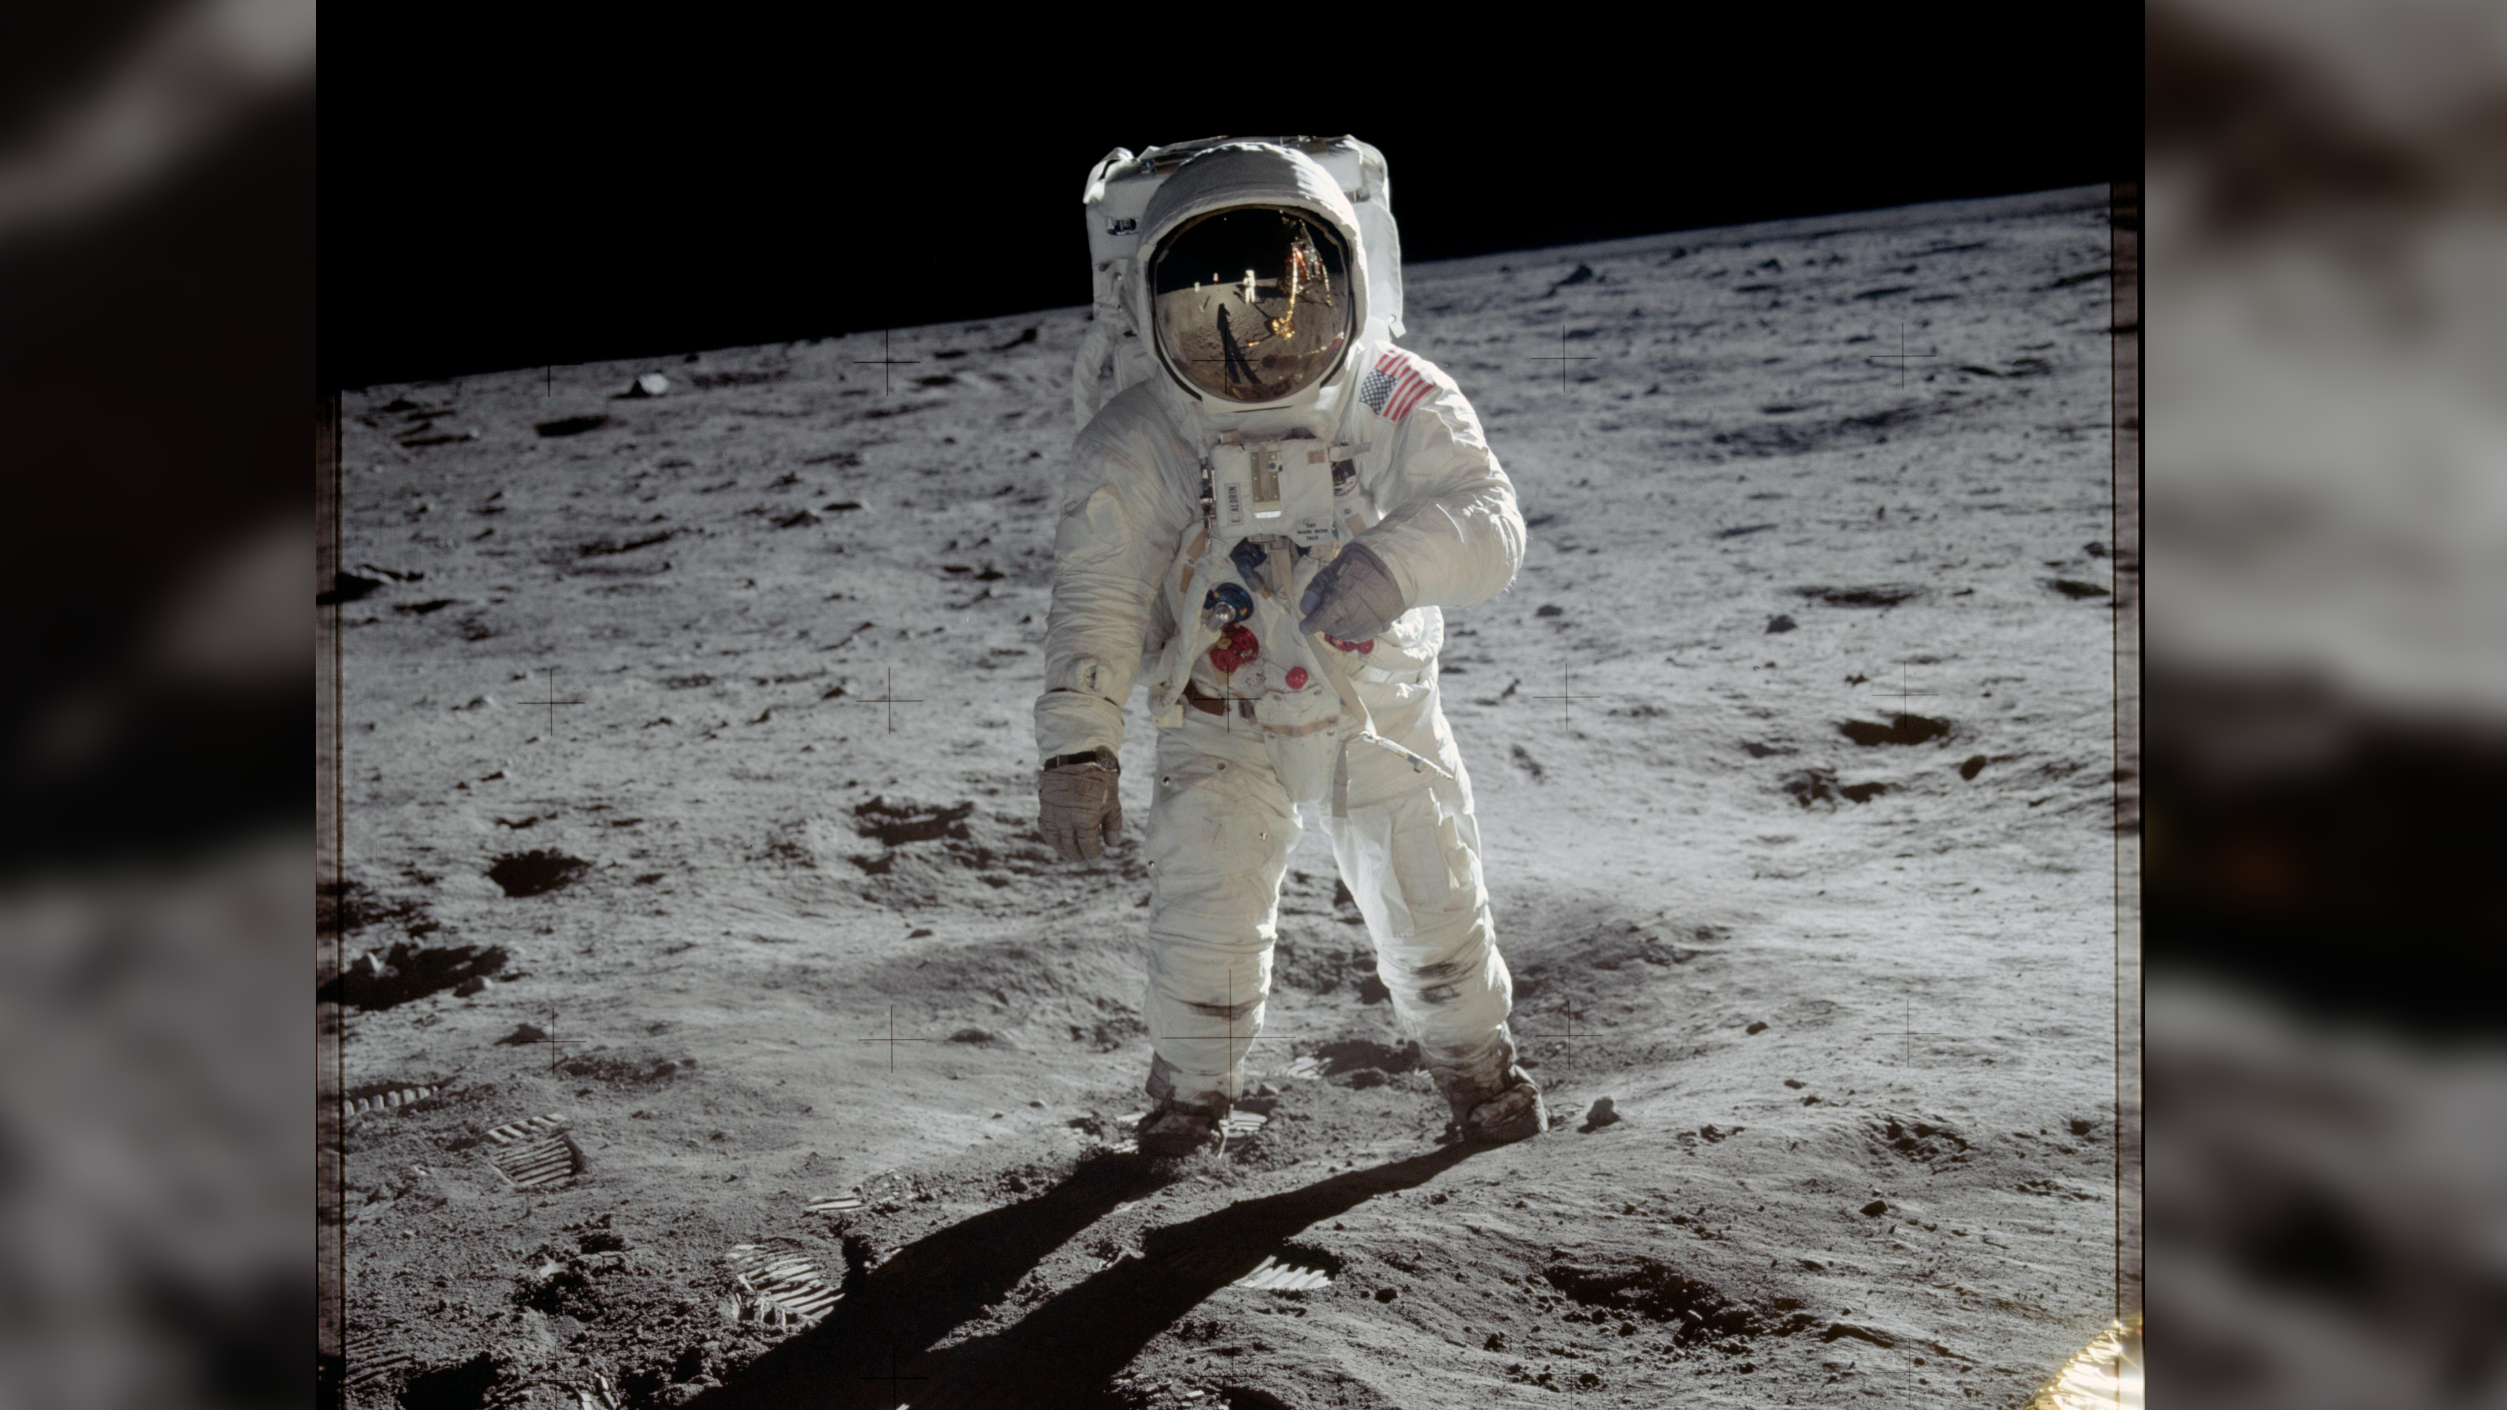 Astronaut Buzz Aldrin walks on the surface of the moon near the leg of the lunar module Eagle during the Apollo 11 mission in July 1969. Mission commander Neil Armstrong took this photograph with a 70-millimeter lunar surface camera.